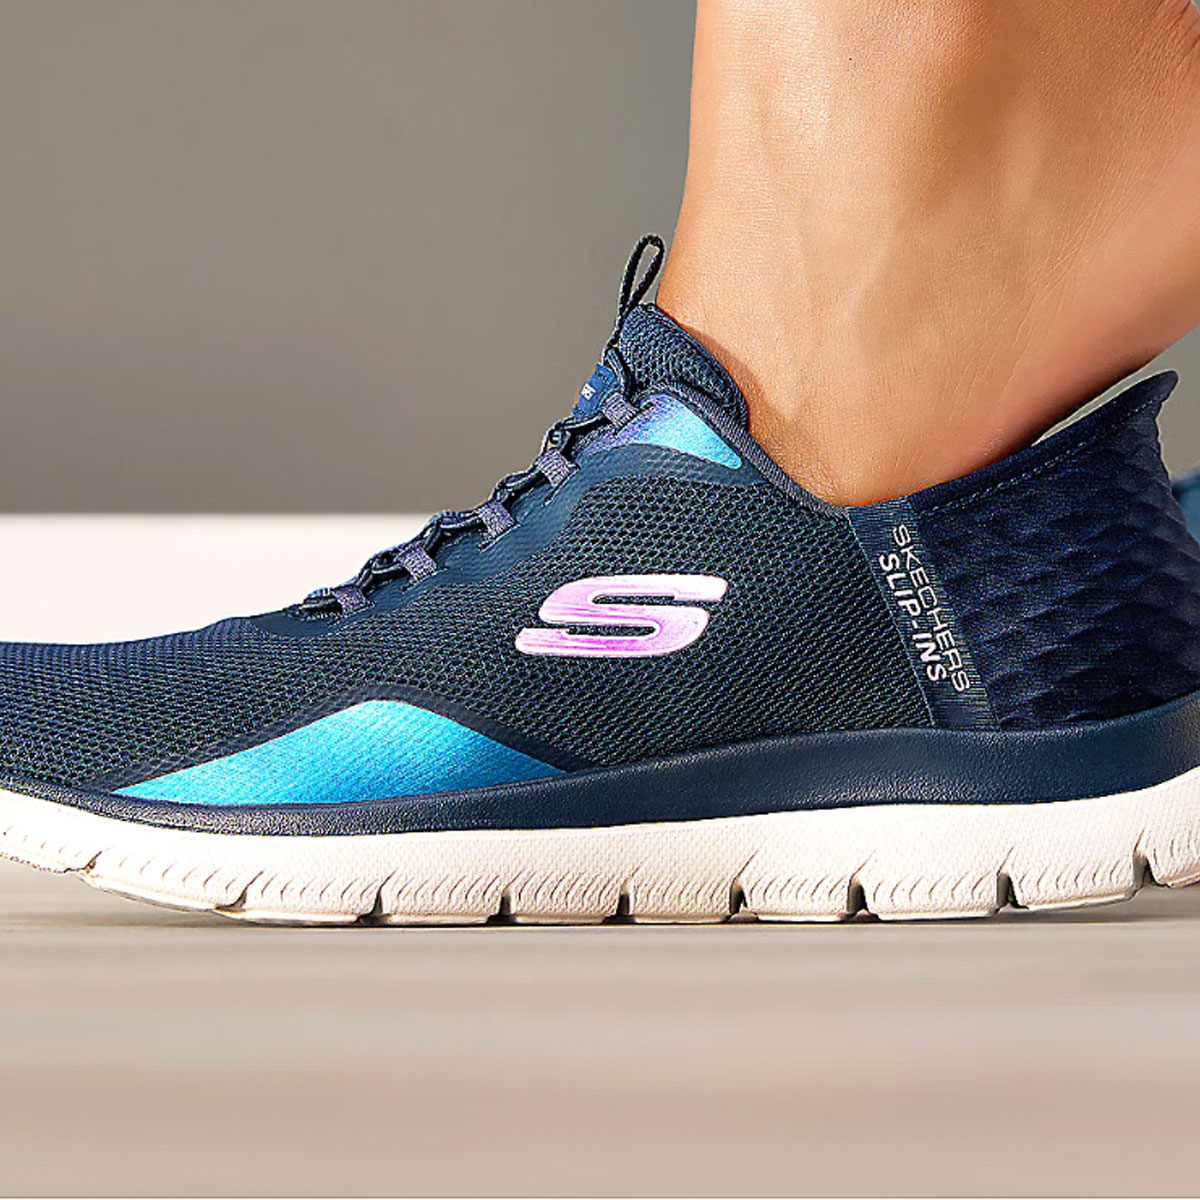 24-Hour Deal: Skechers Washable Sneakers and Free Shipping